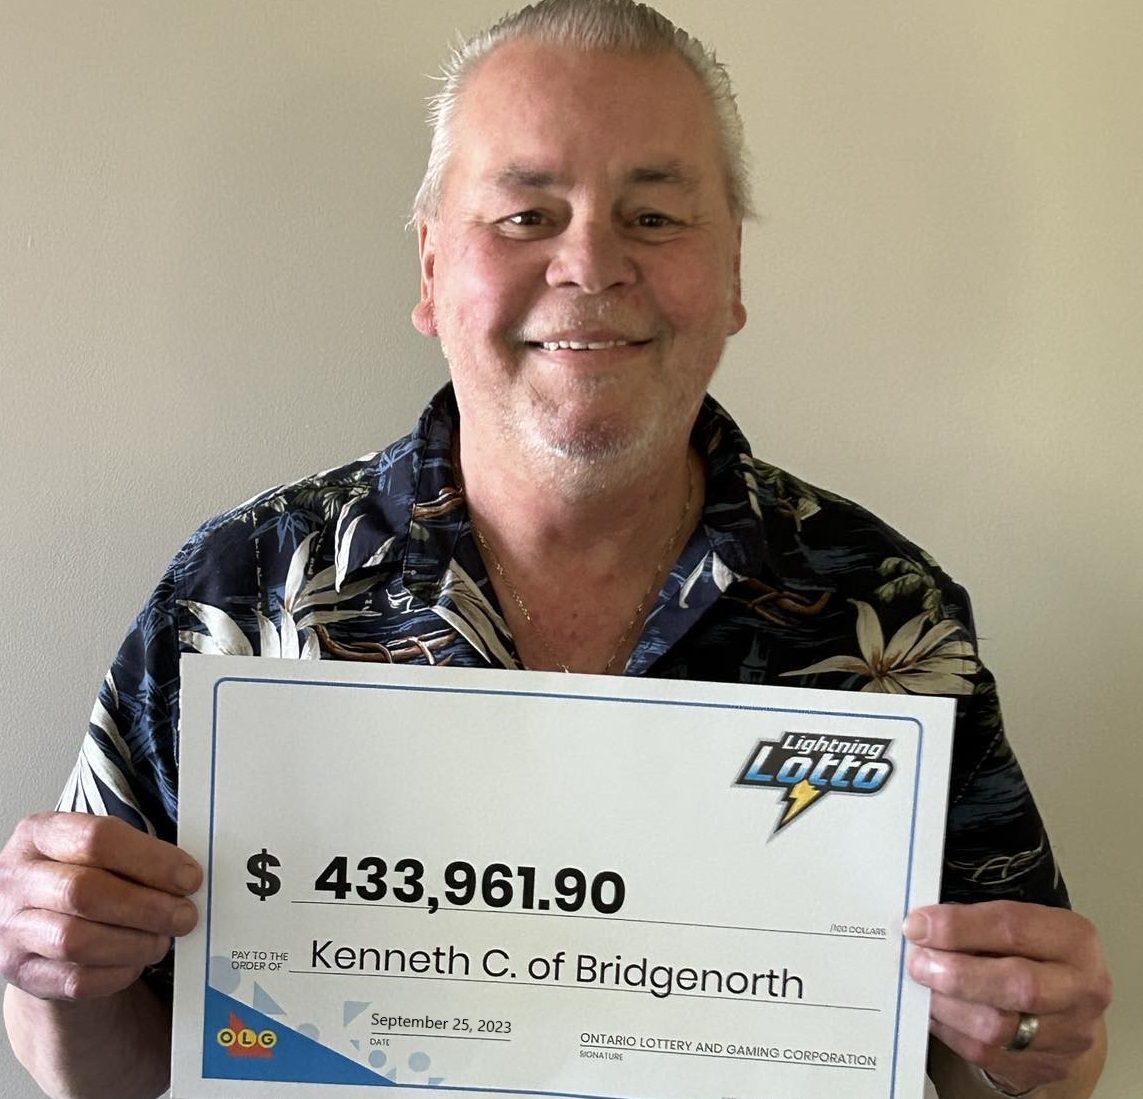 A man from Bridgenorth, Ont., claimed over $430,000 in the OLG's Lightning lottery.